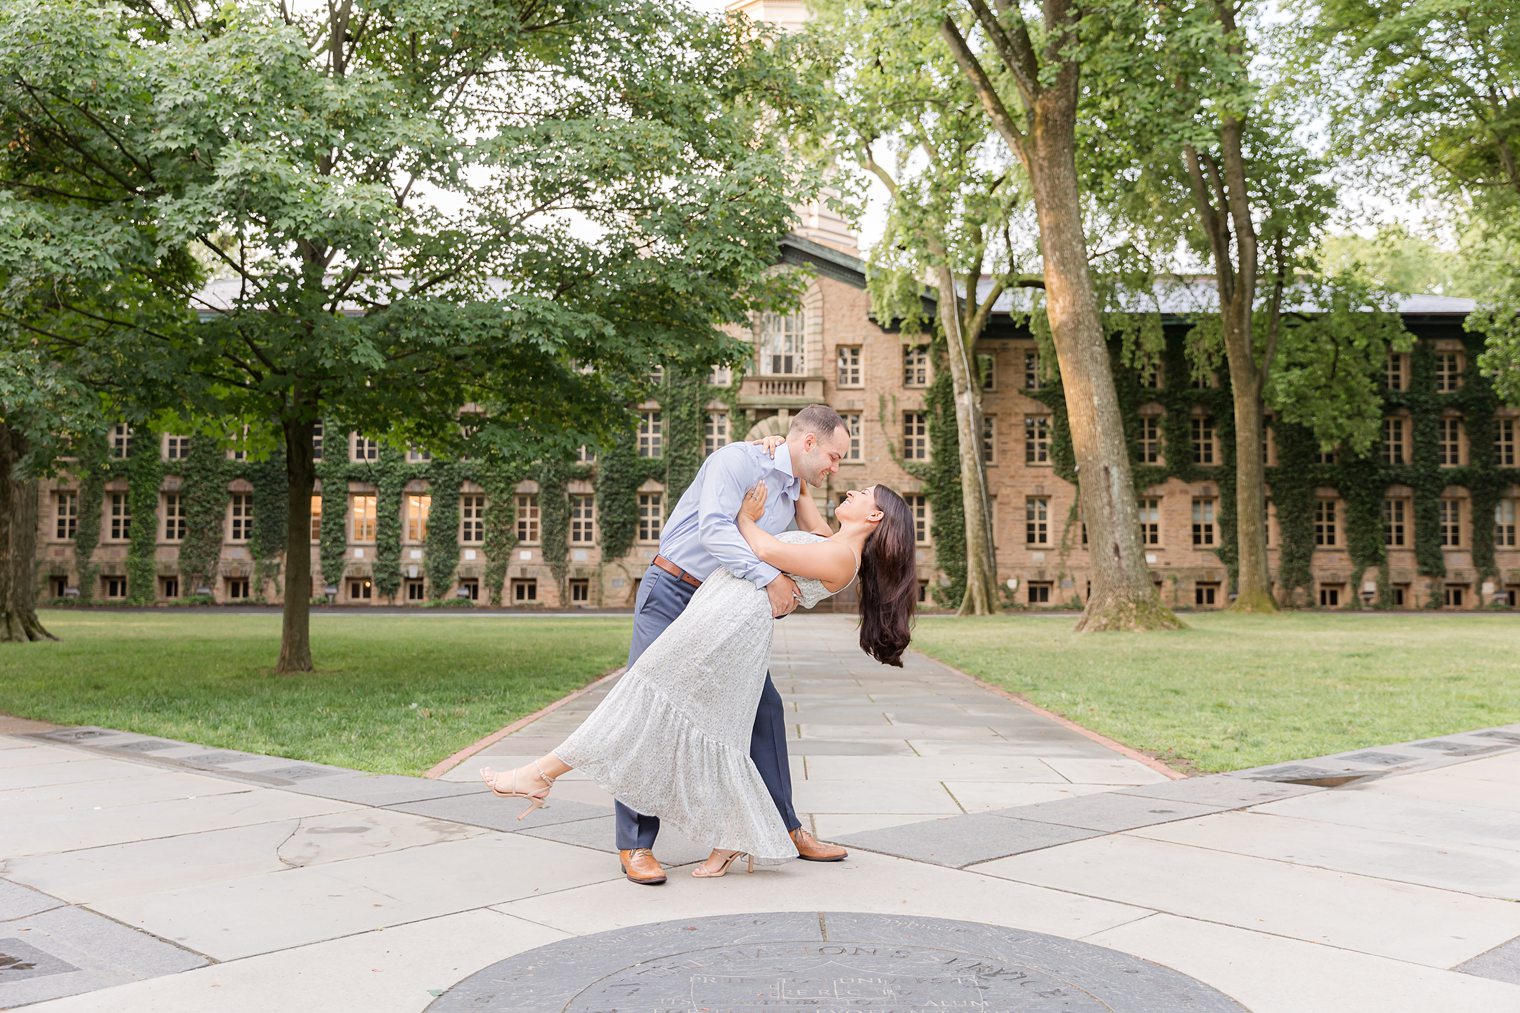 Happily engaged couple celebrating their commitment at Princeton New Jersey 